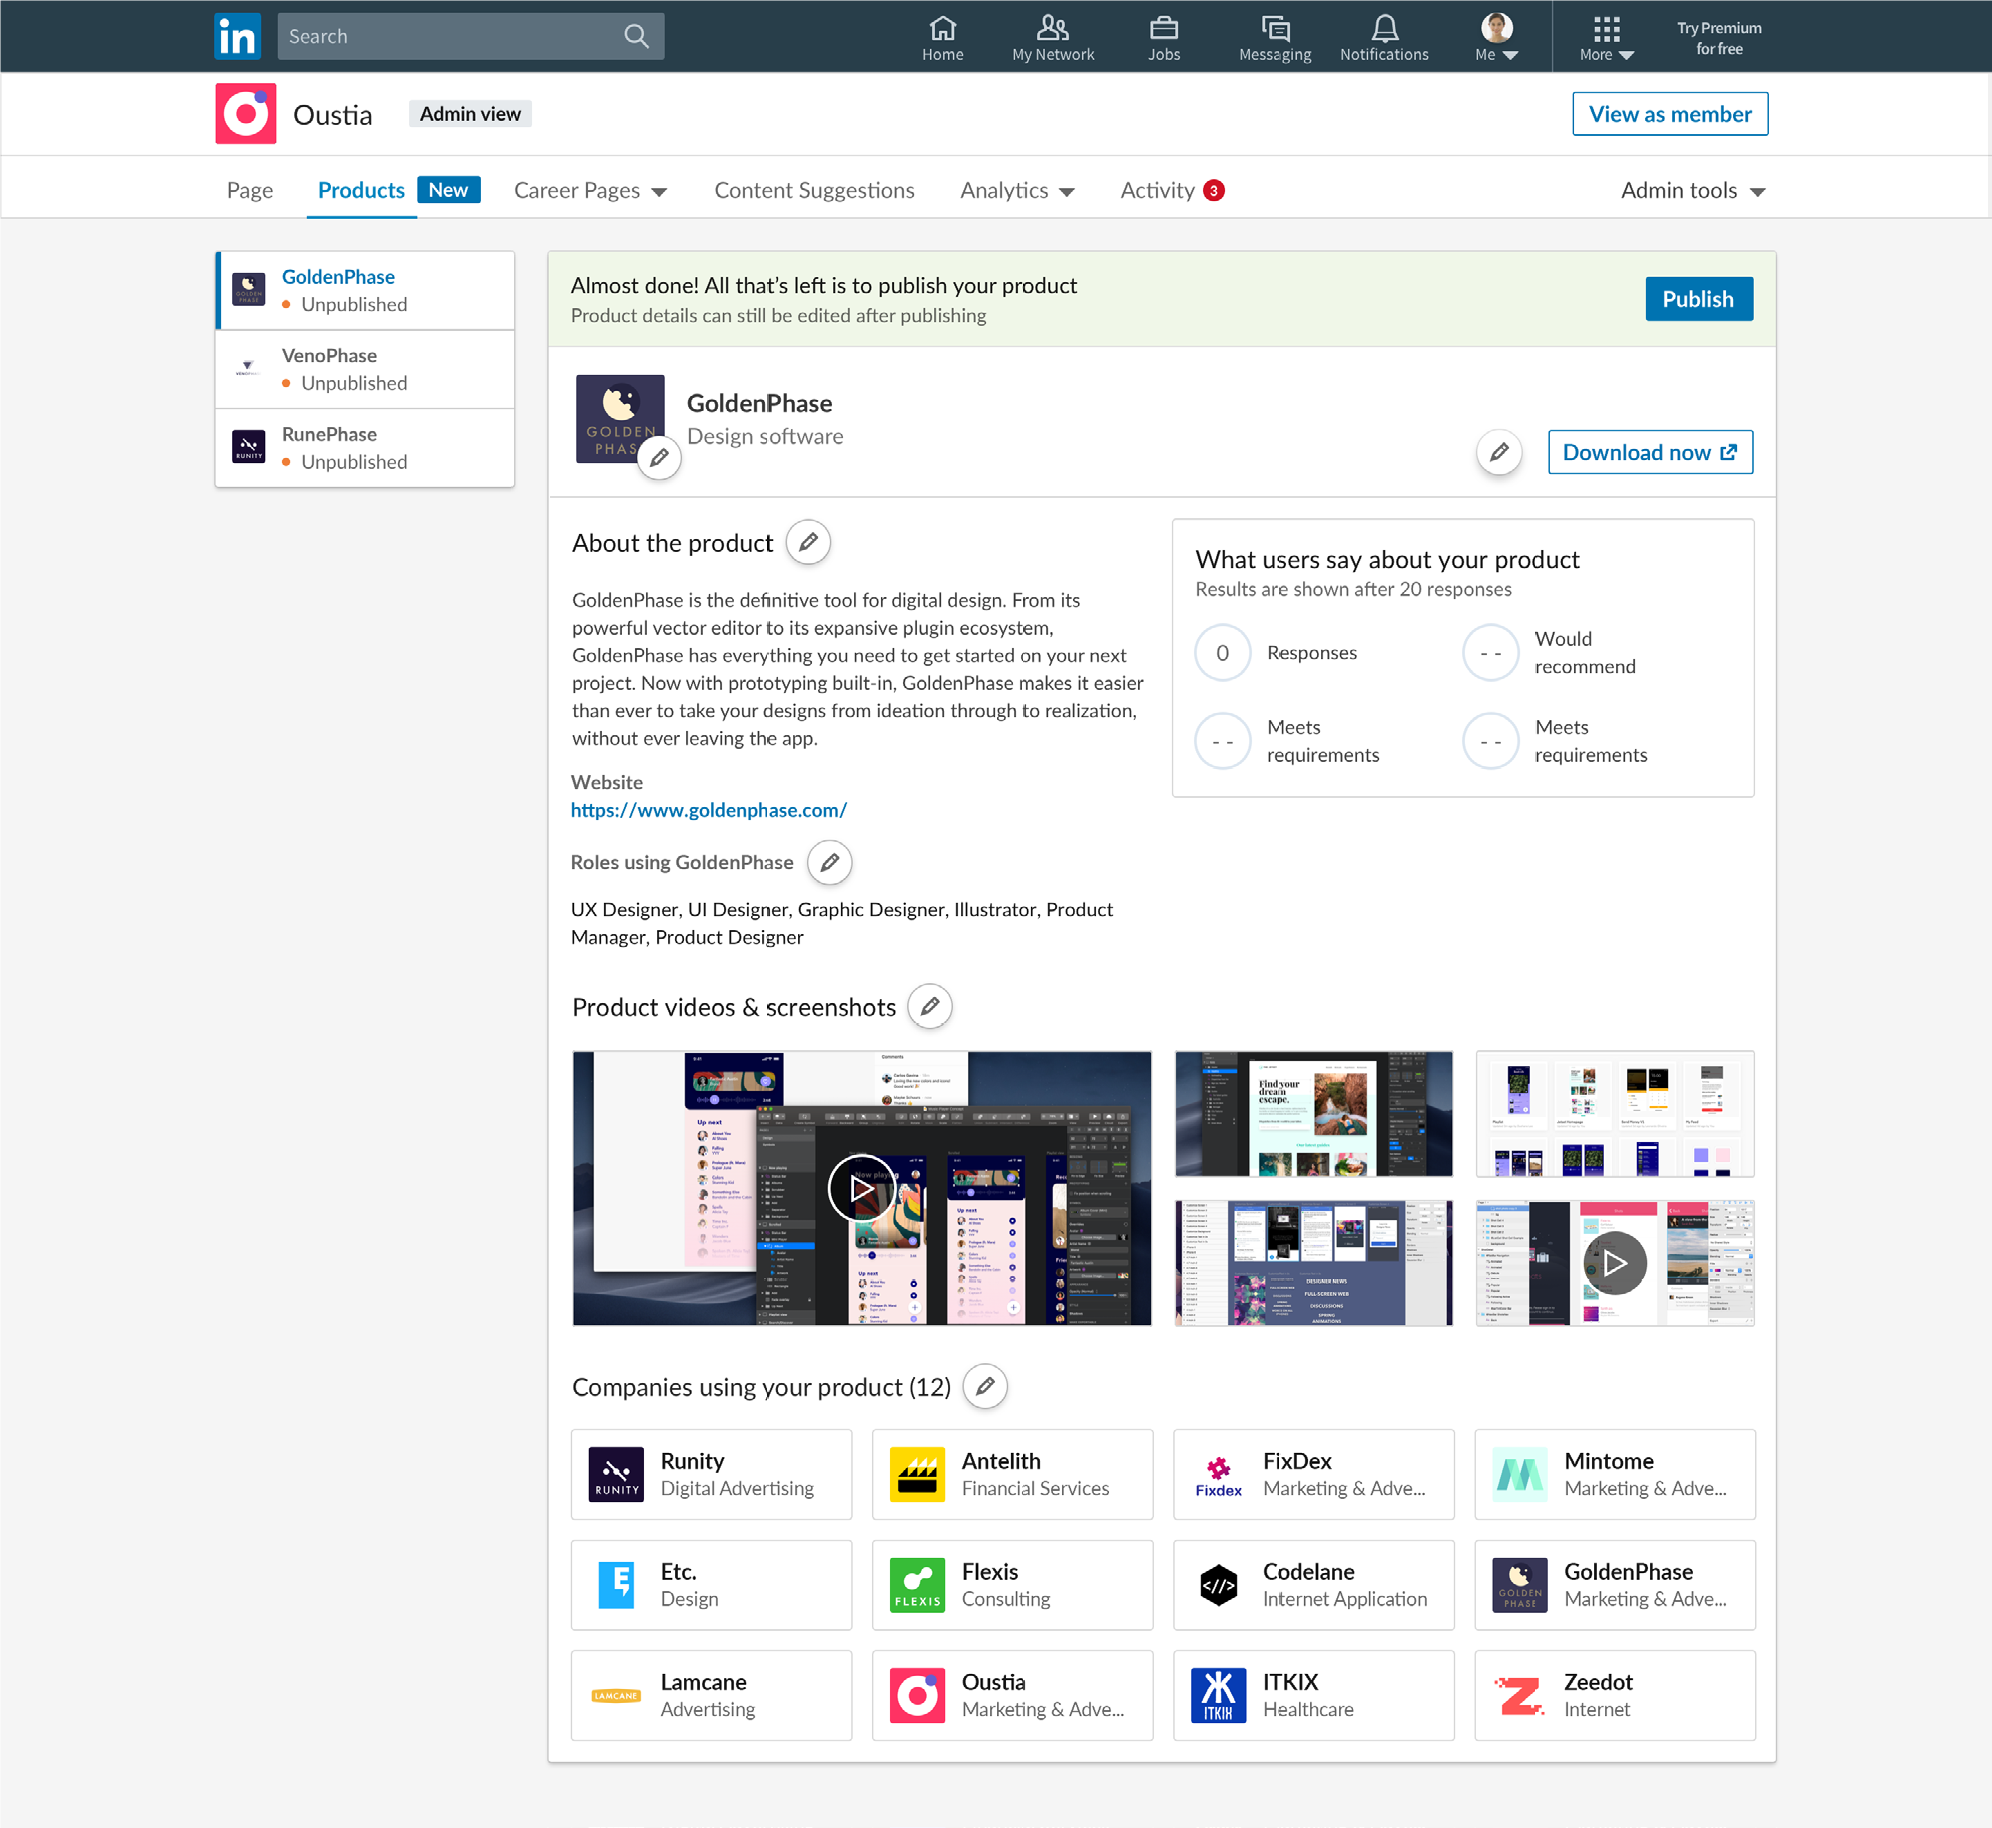 Example of a LinkedIn Products Page